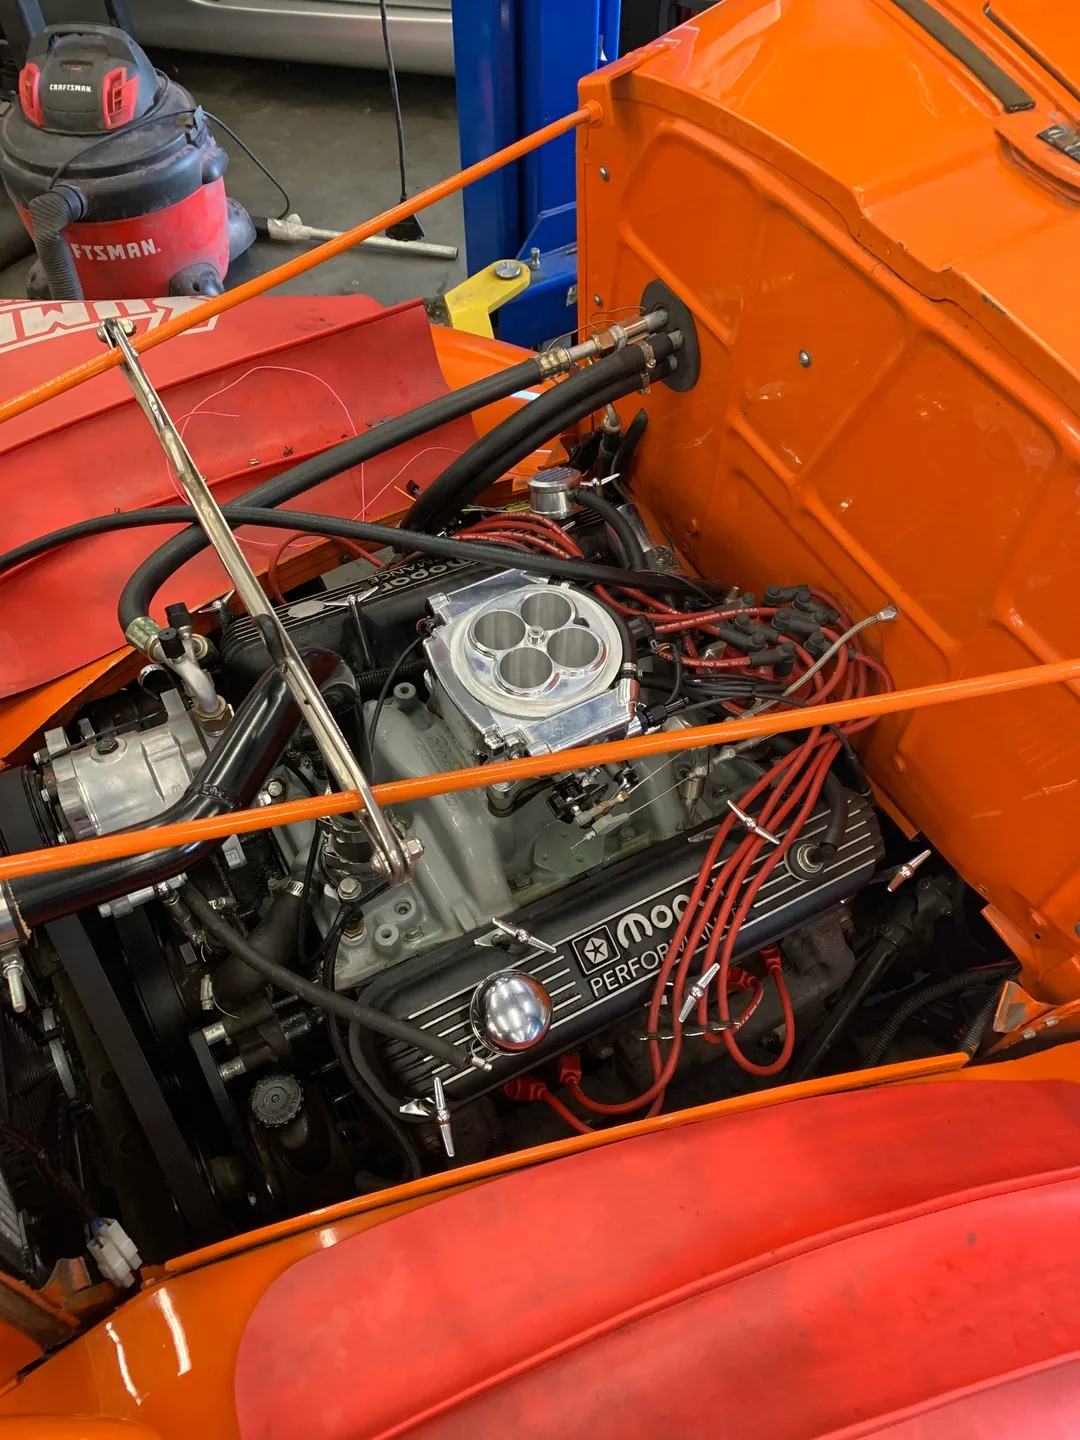 An inside view of an orange engine and battery